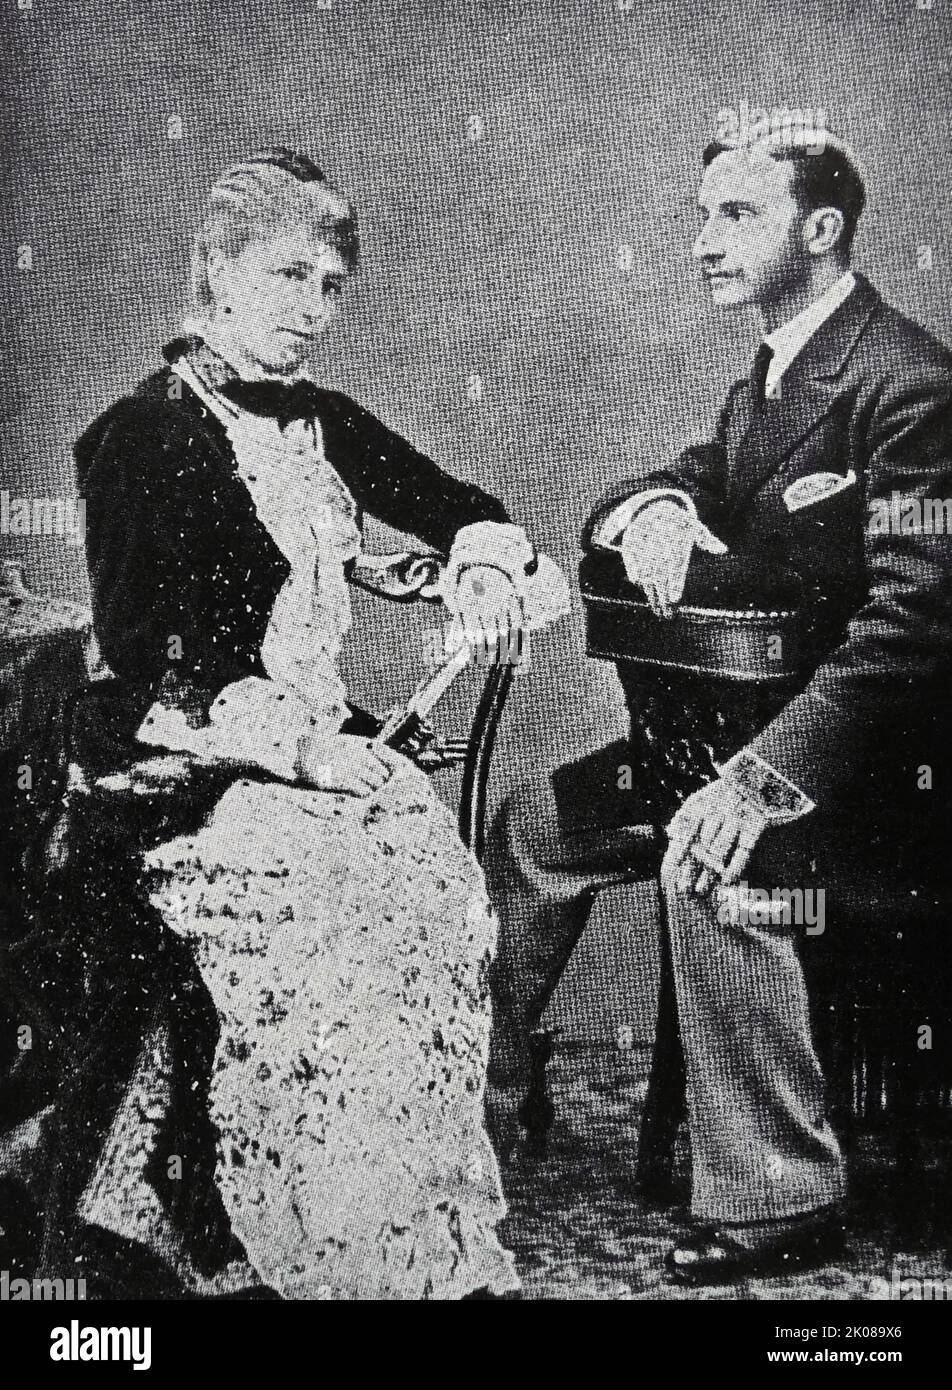 King of Spain Alfonso XII and his wife Maria Christina. Alfonso XII (Alfonso Francisco de Asis Fernando Pio Juan Maria de la Concepcion Gregorio Pelayo; 28 November 1857 - 25 November 1885), also known as El Pacificador or the Peacemaker, was King of Spain from 29 December 1874 to his death in 1885. Archduchess Maria Christina Henriette Desideria Felicitas Raineria of Austria (21 July 1858 - 6 February 1929) was the second queen consort of Alfonso XII of Spain Stock Photo